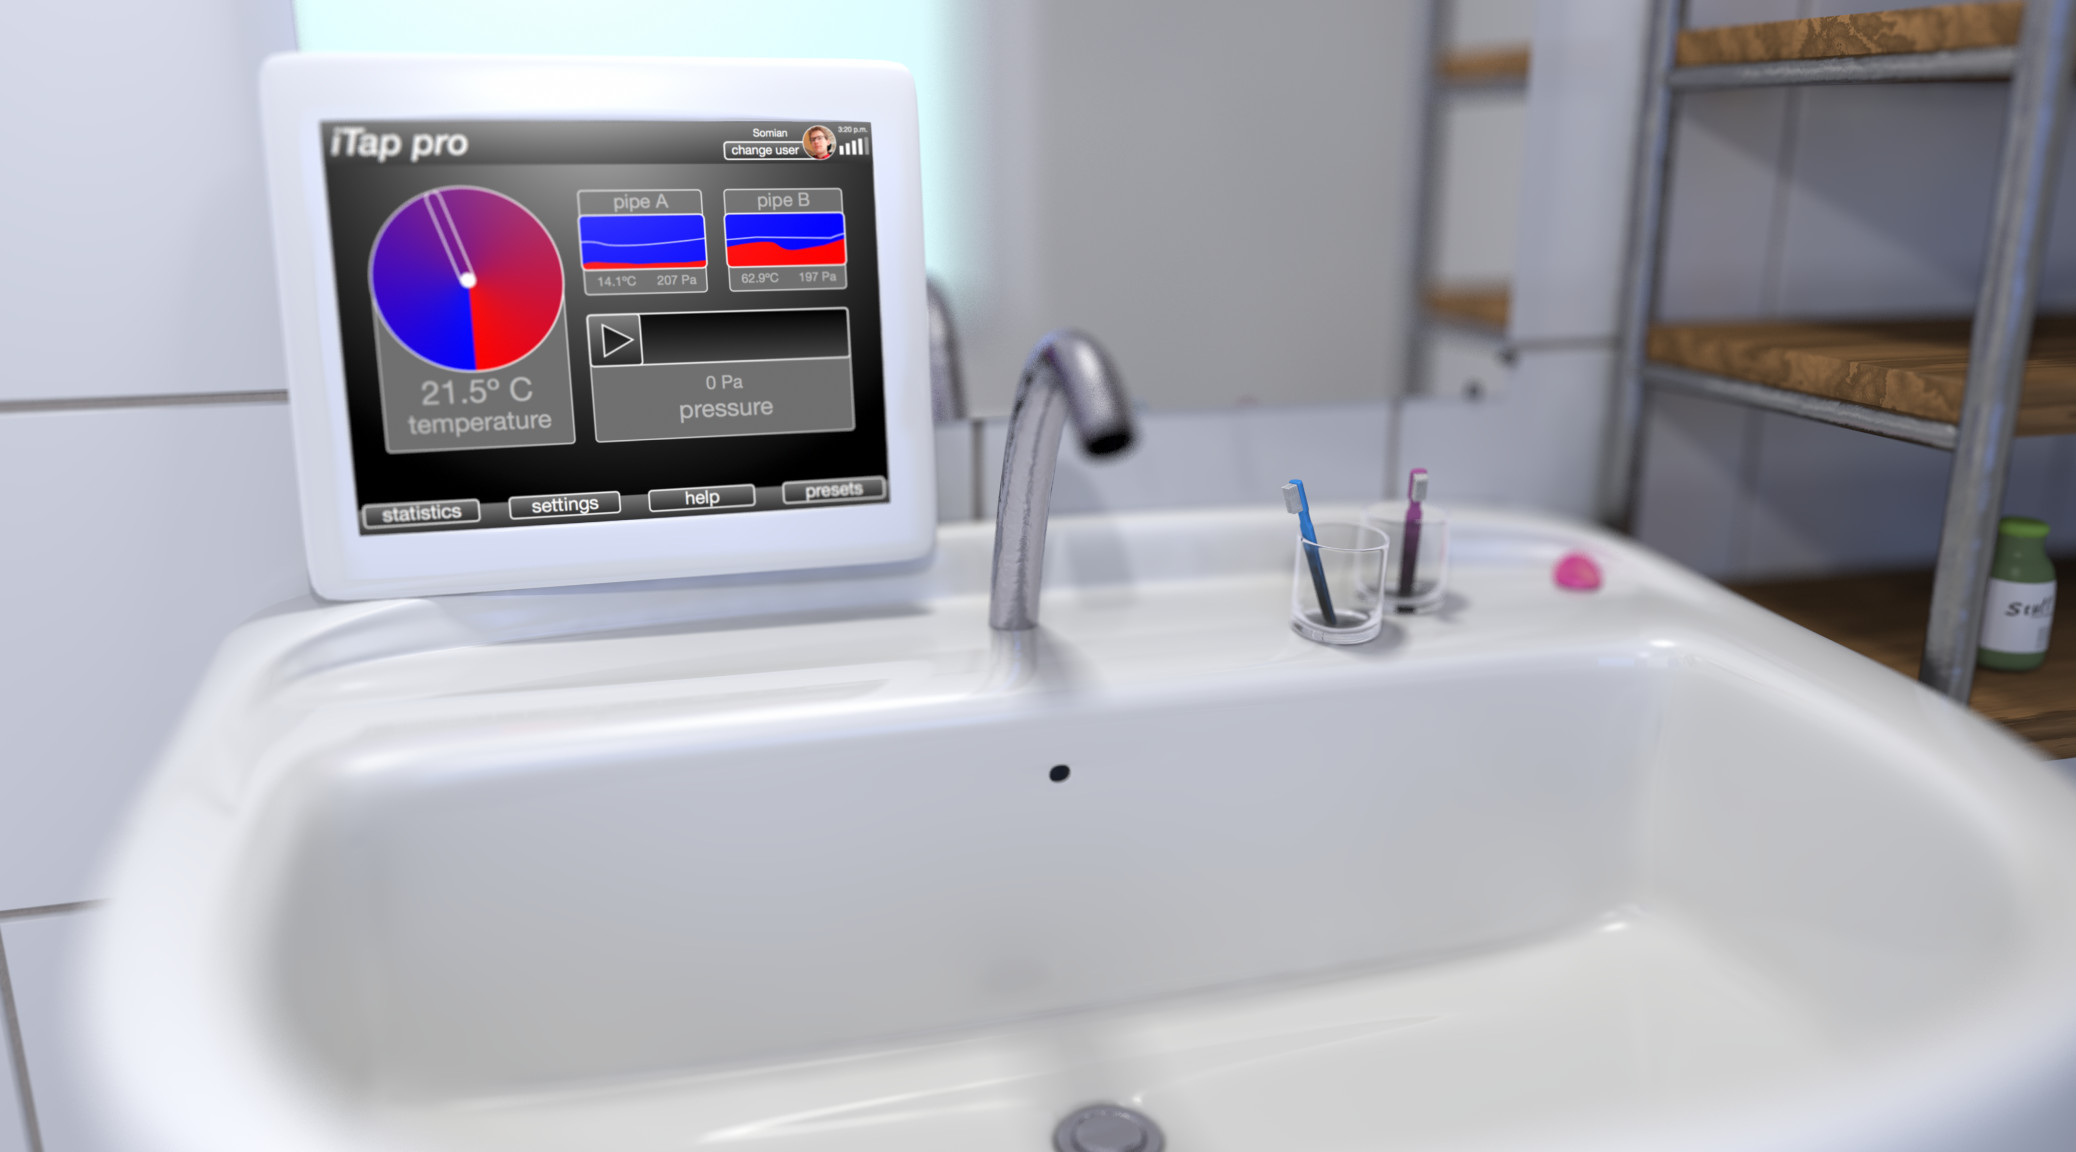 A picture of a faucet that is controlled via a touchscreen showing unecessary charts.